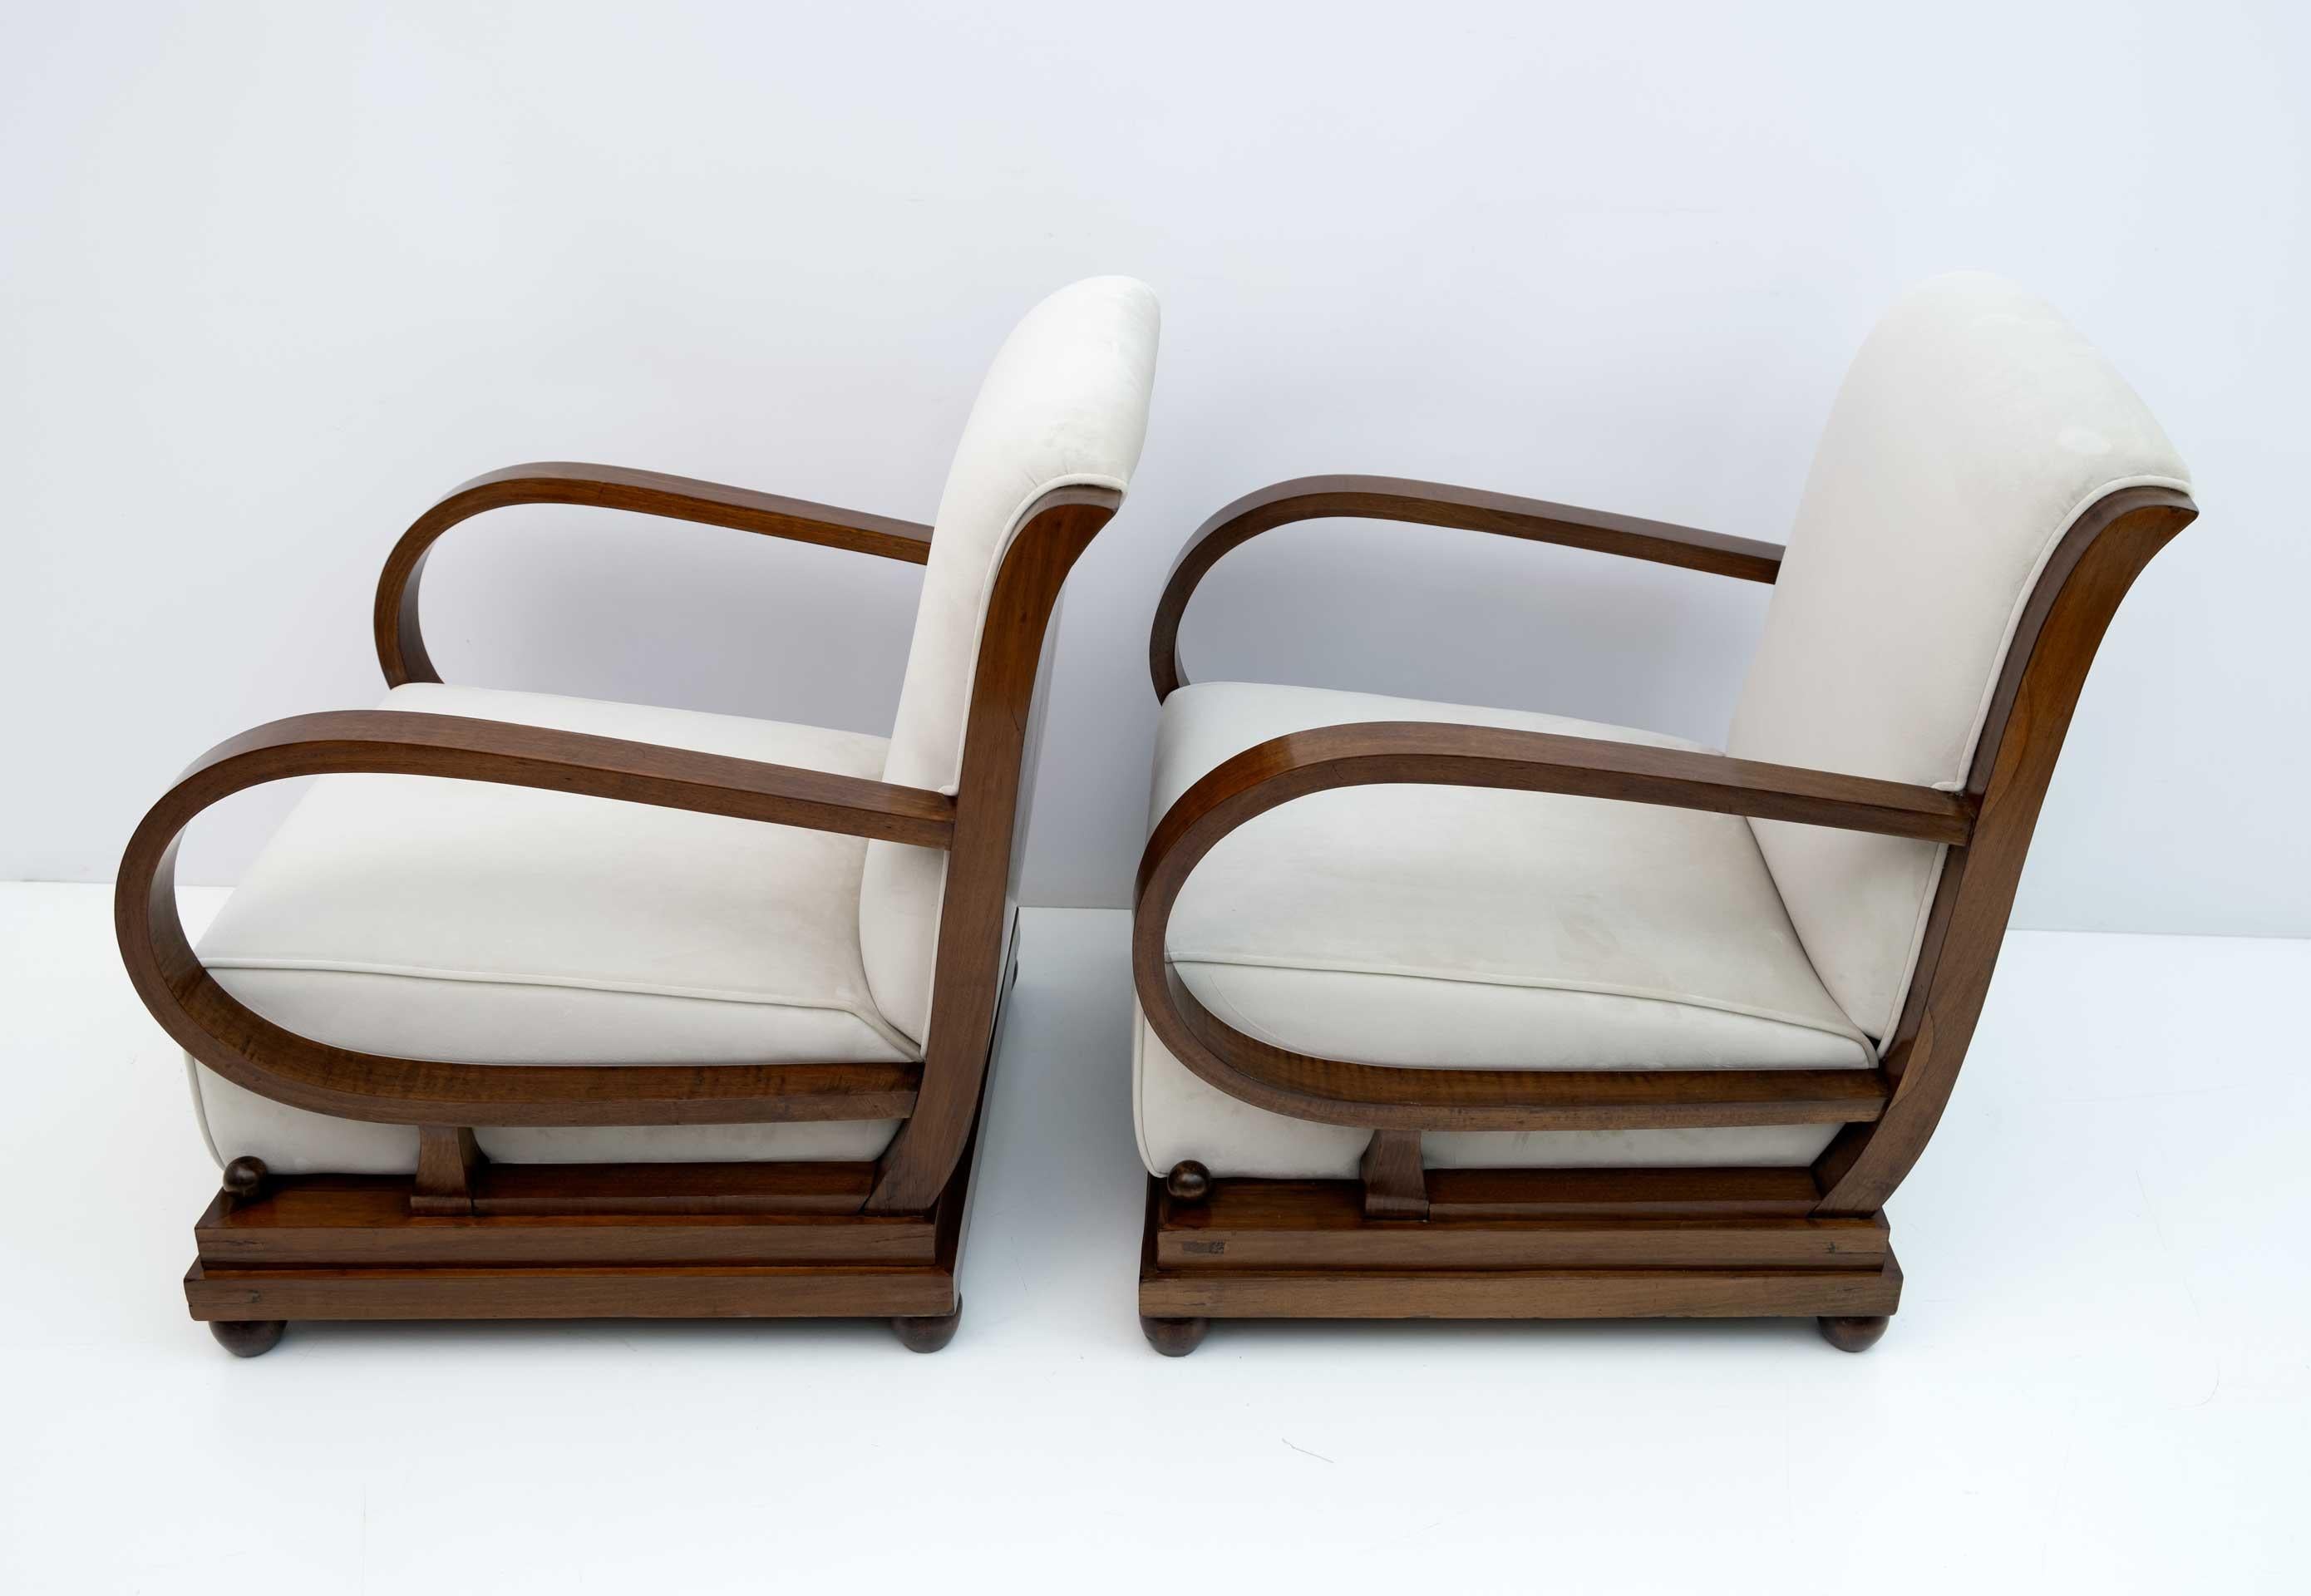 Pair of Art Dèco Italian Walnut and Velvet Armchairs and Two Ottomans, 1920s For Sale 2